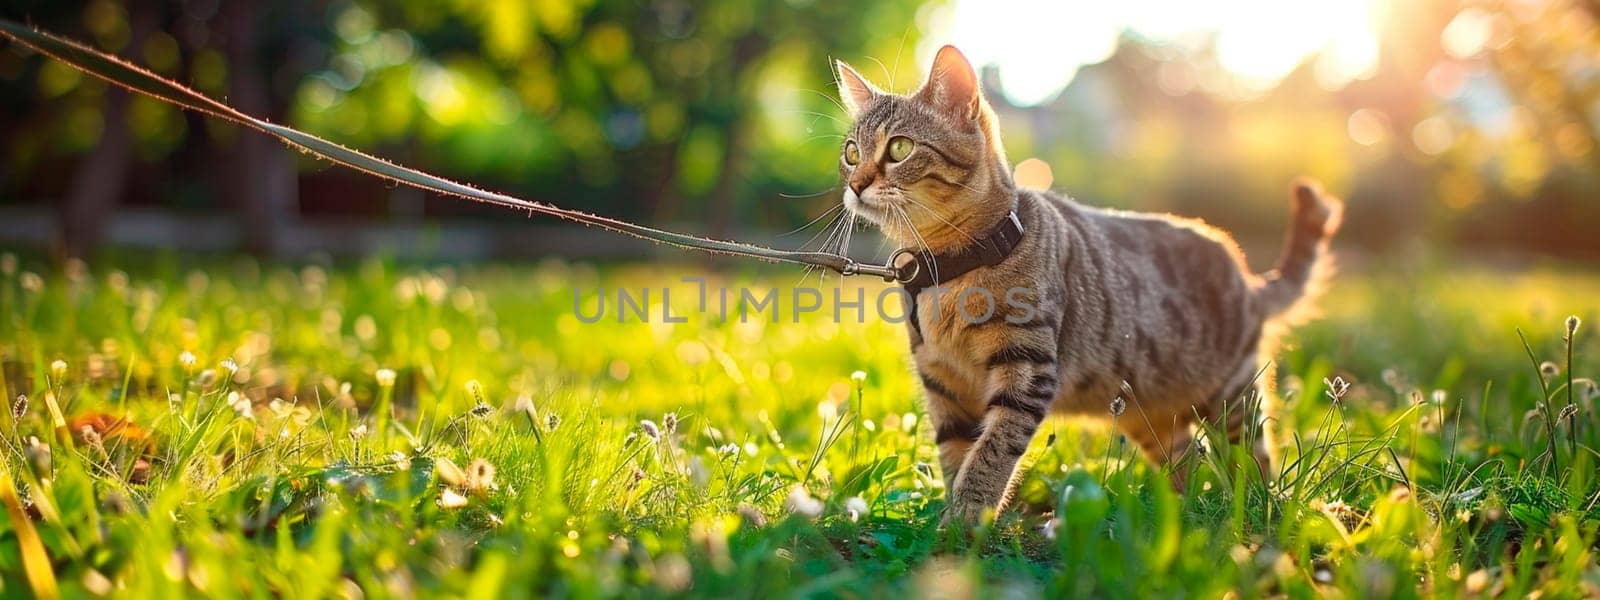 the cat walks on a leash in the park. Selective focus. by yanadjana